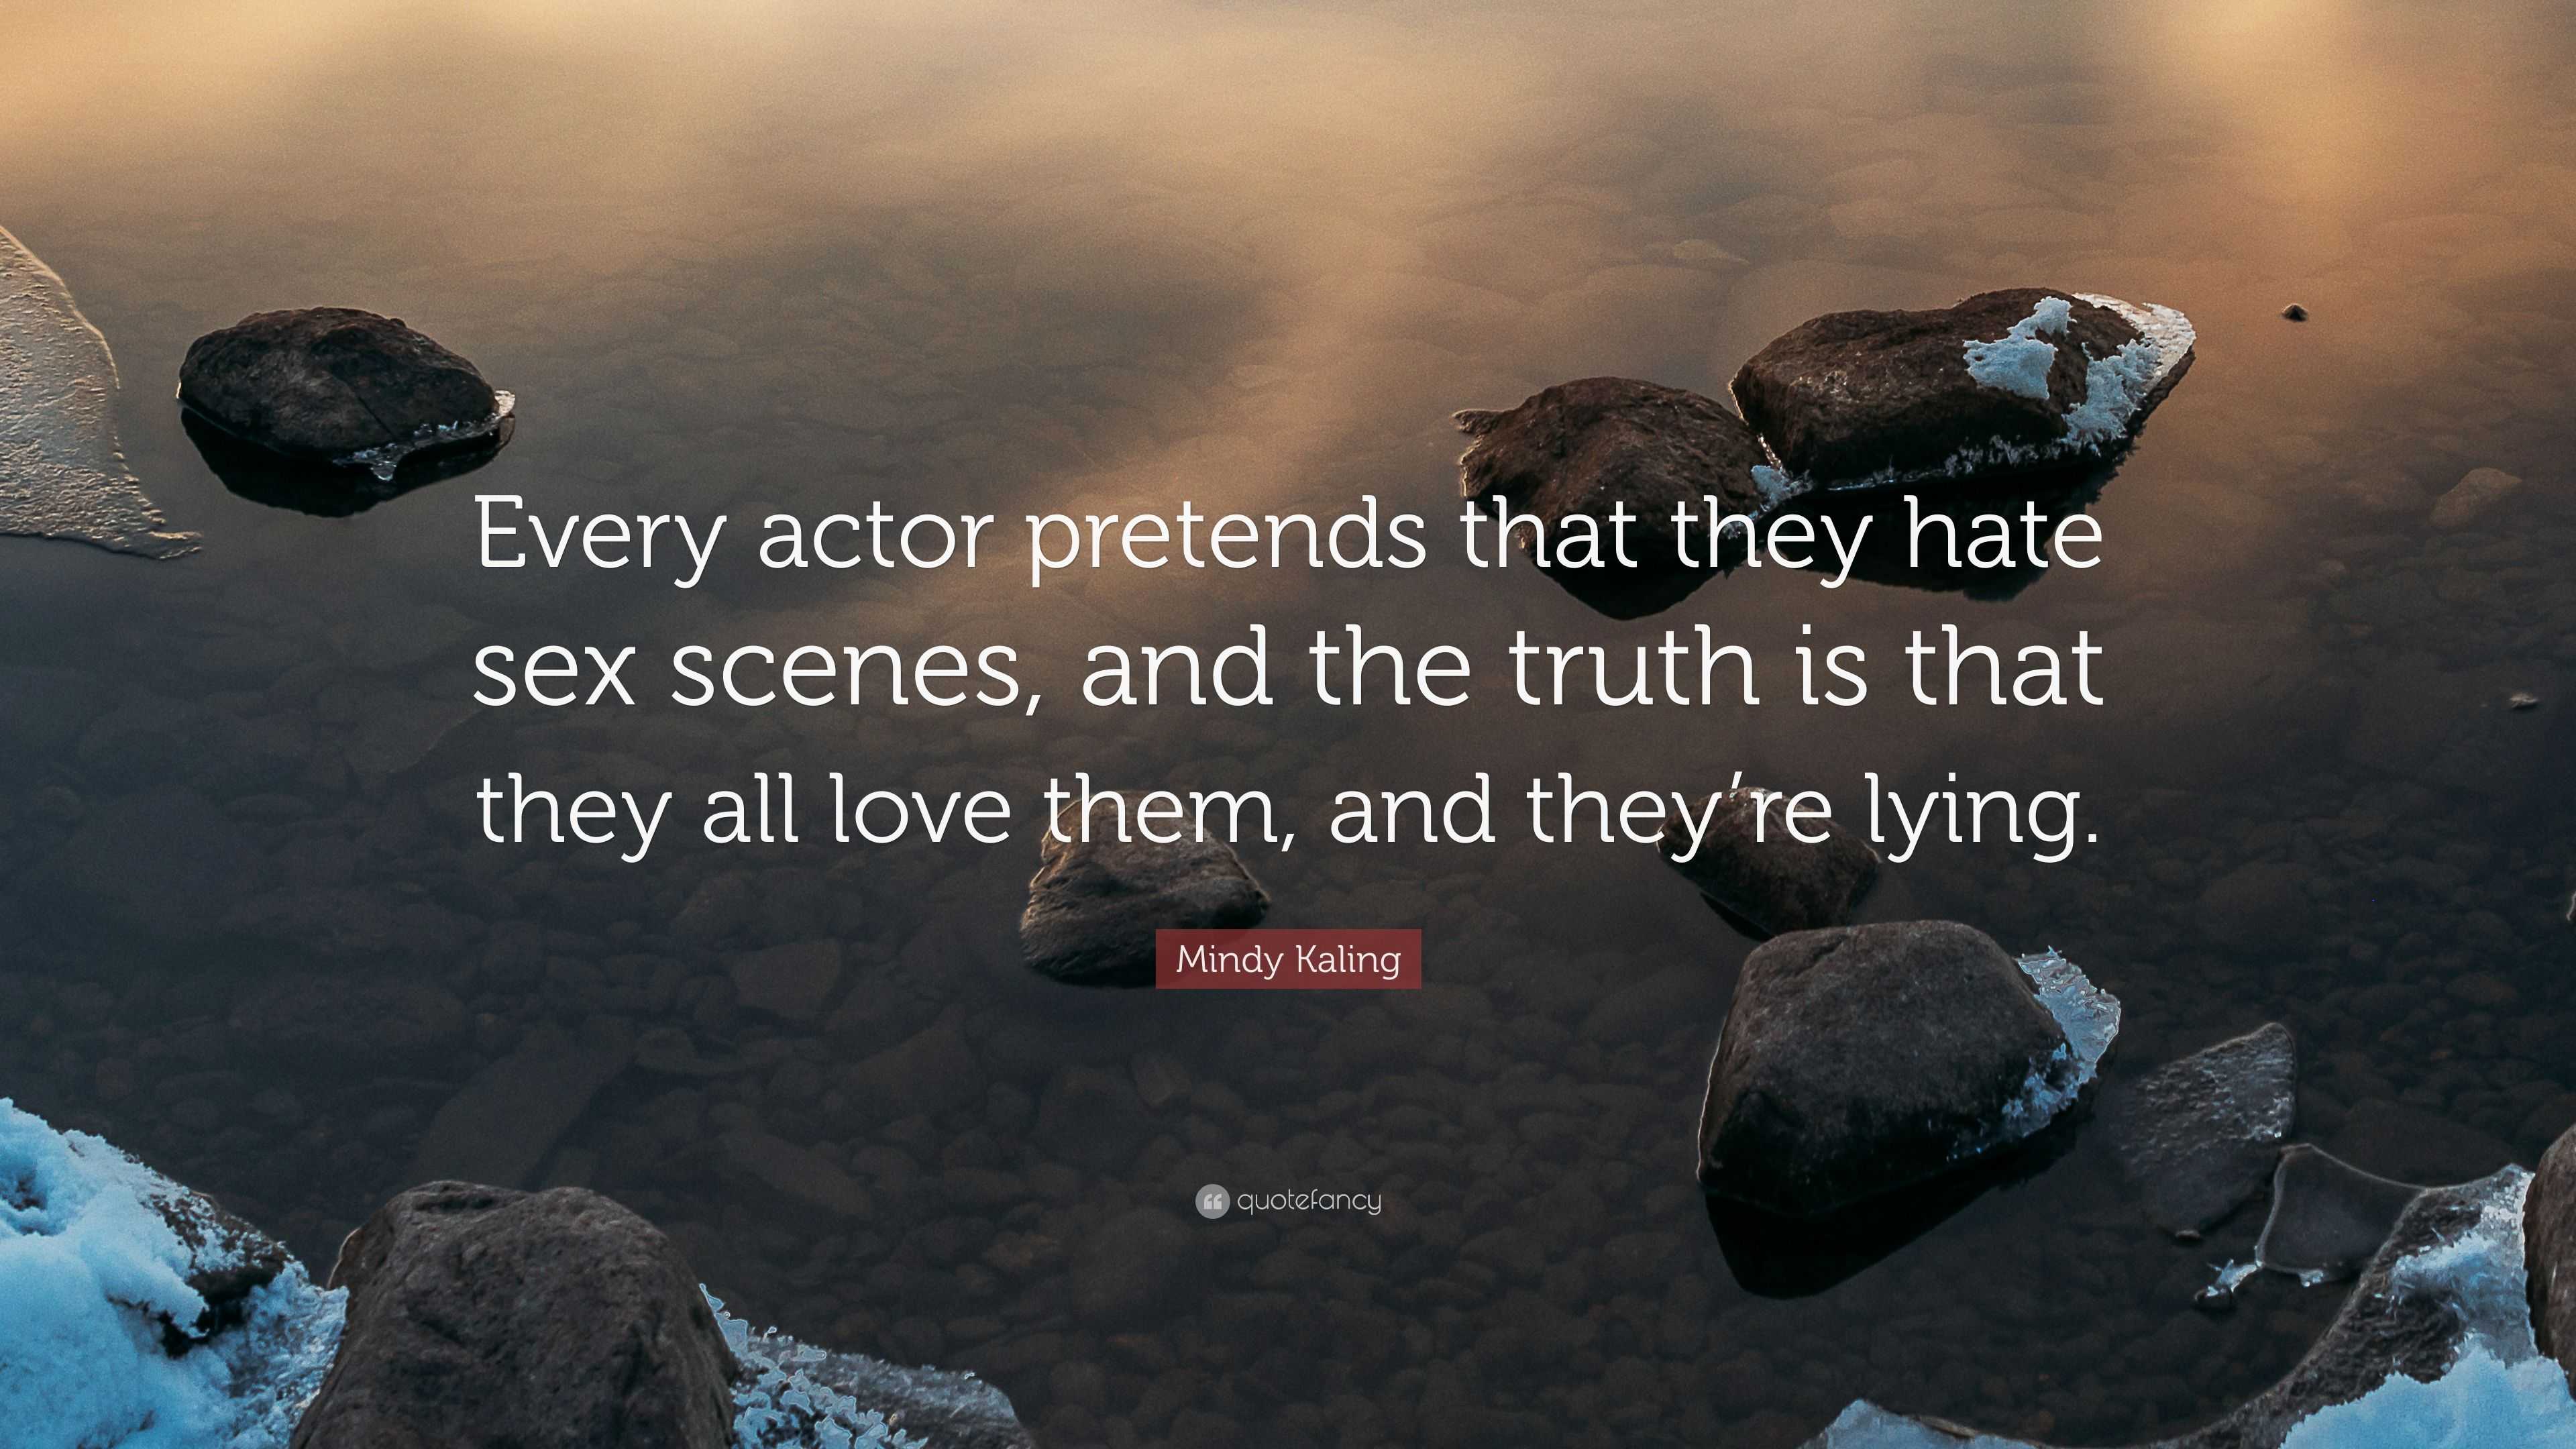 Mindy Kaling Quote “every Actor Pretends That They Hate Sex Scenes And The Truth Is That They 